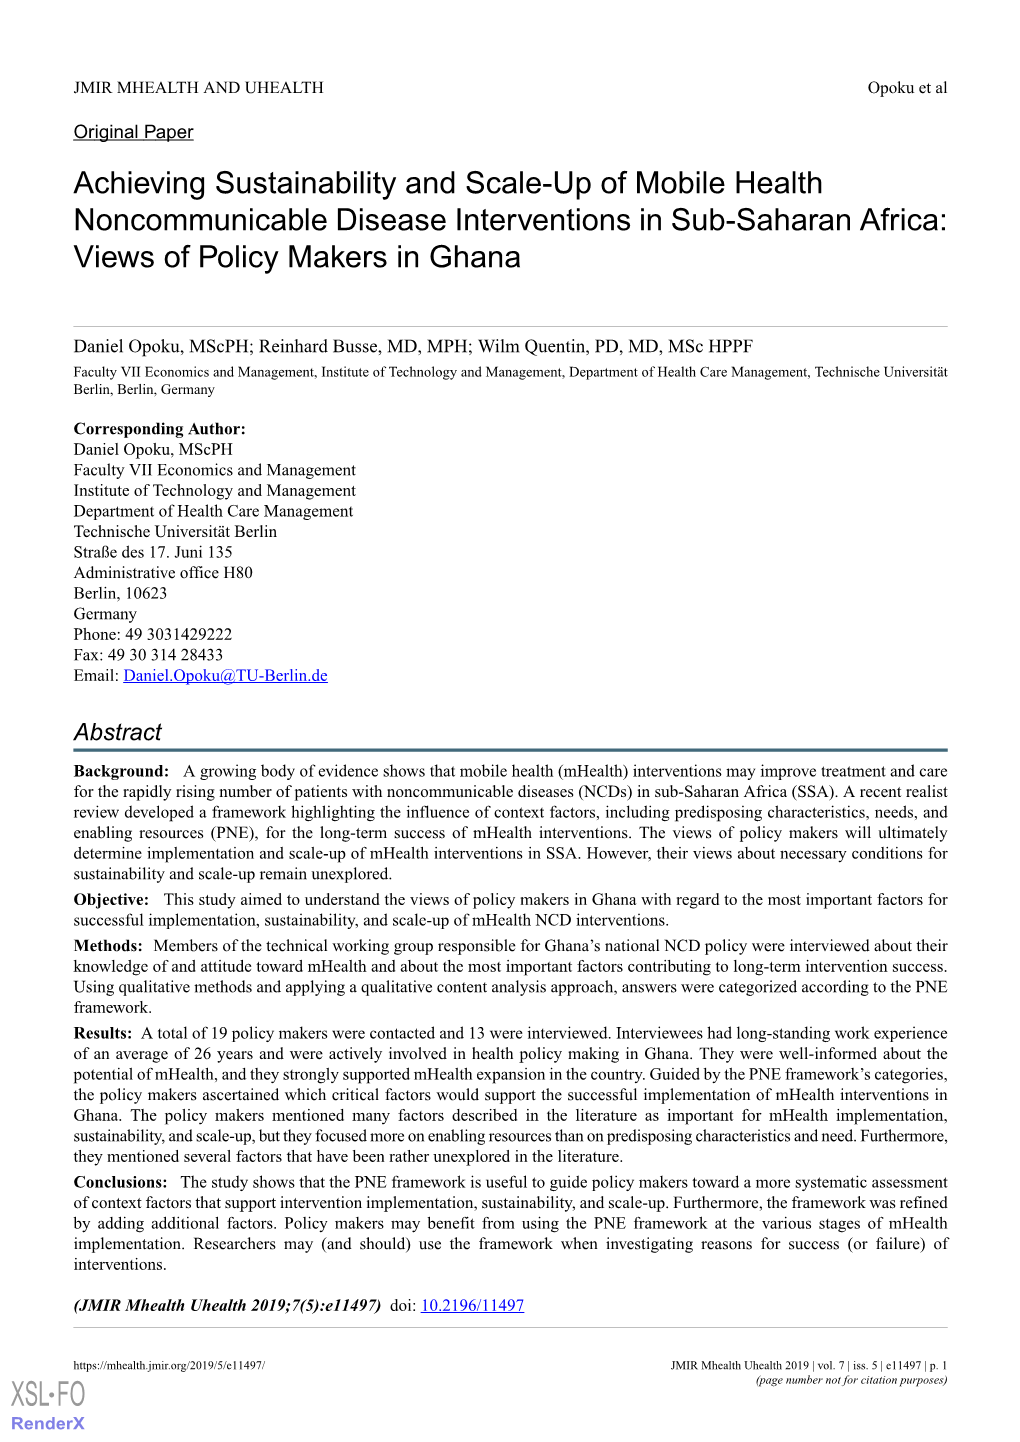 Achieving Sustainability and Scale-Up of Mobile Health Noncommunicable Disease Interventions in Sub-Saharan Africa: Views of Policy Makers in Ghana